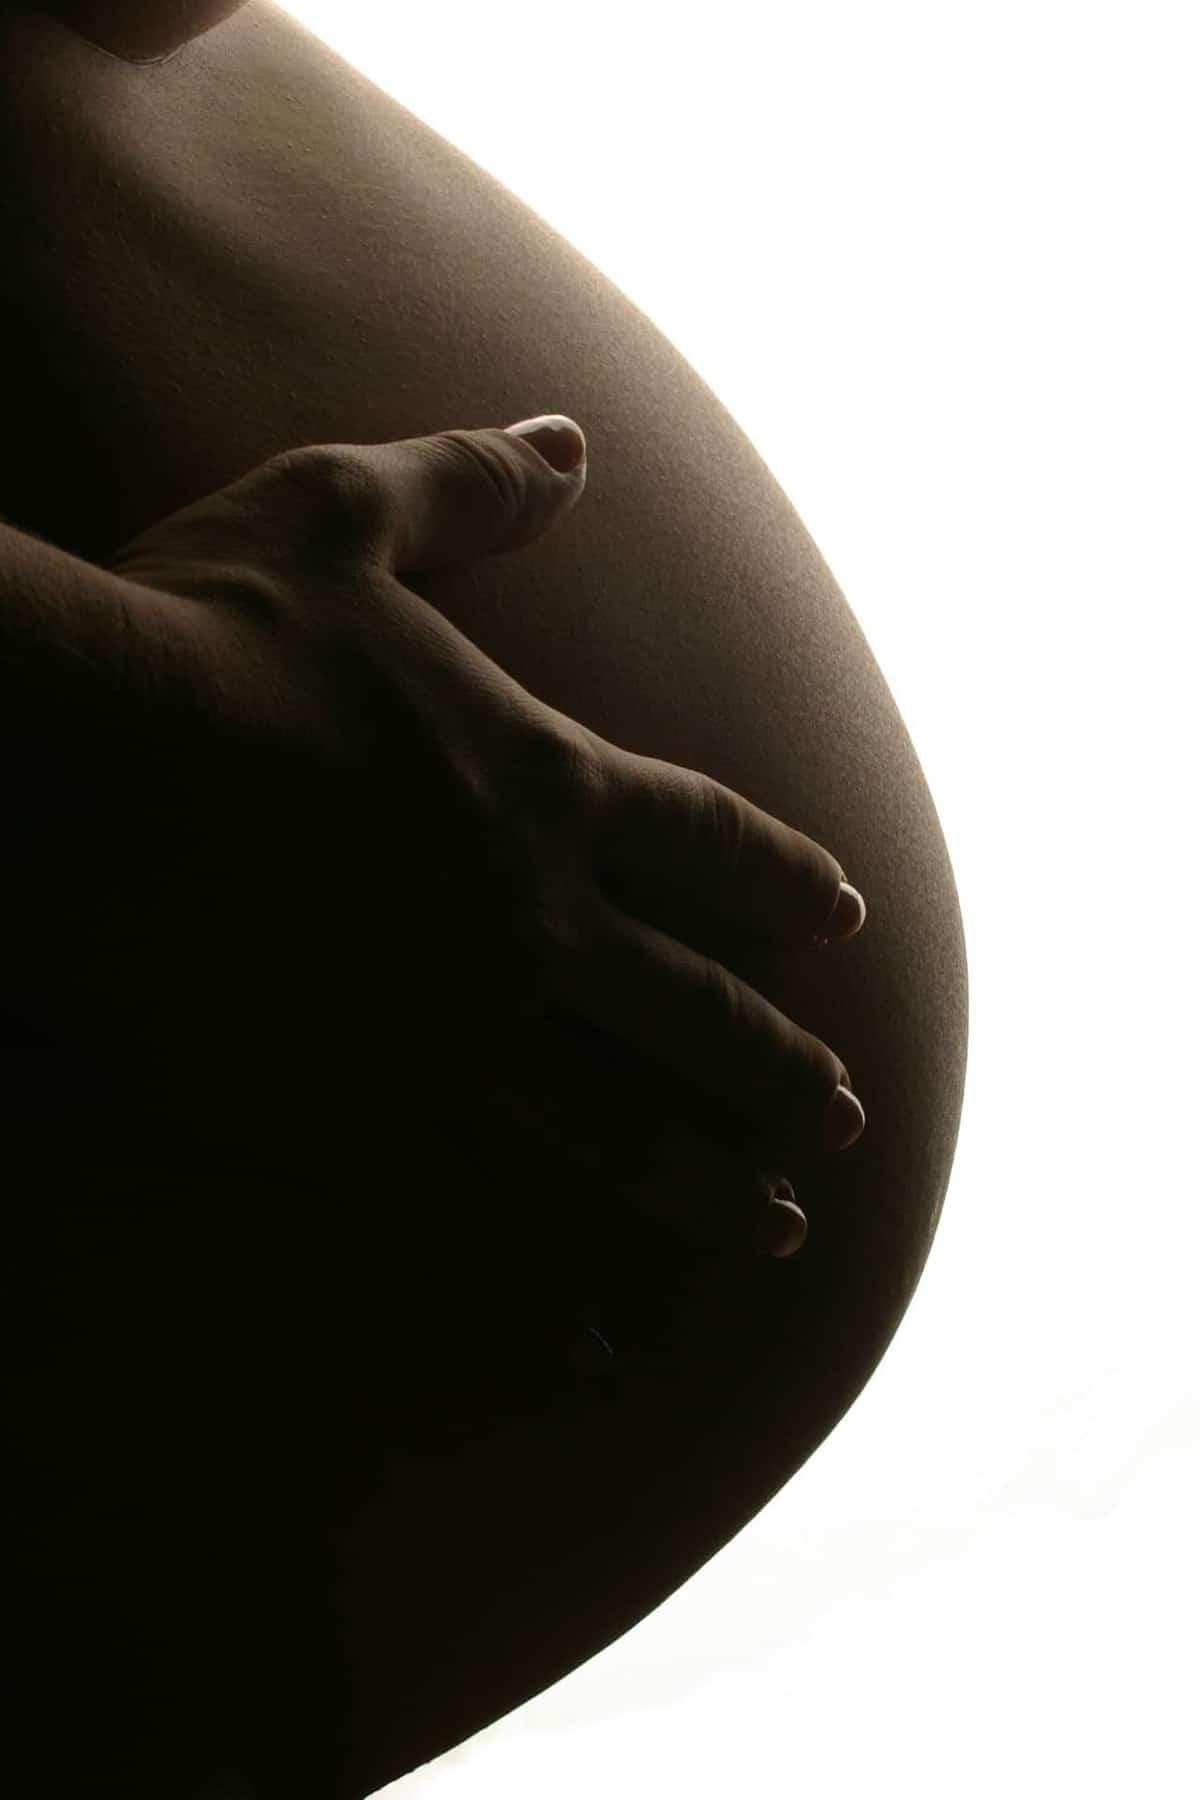 Woman with her hands on her pregnant belly.